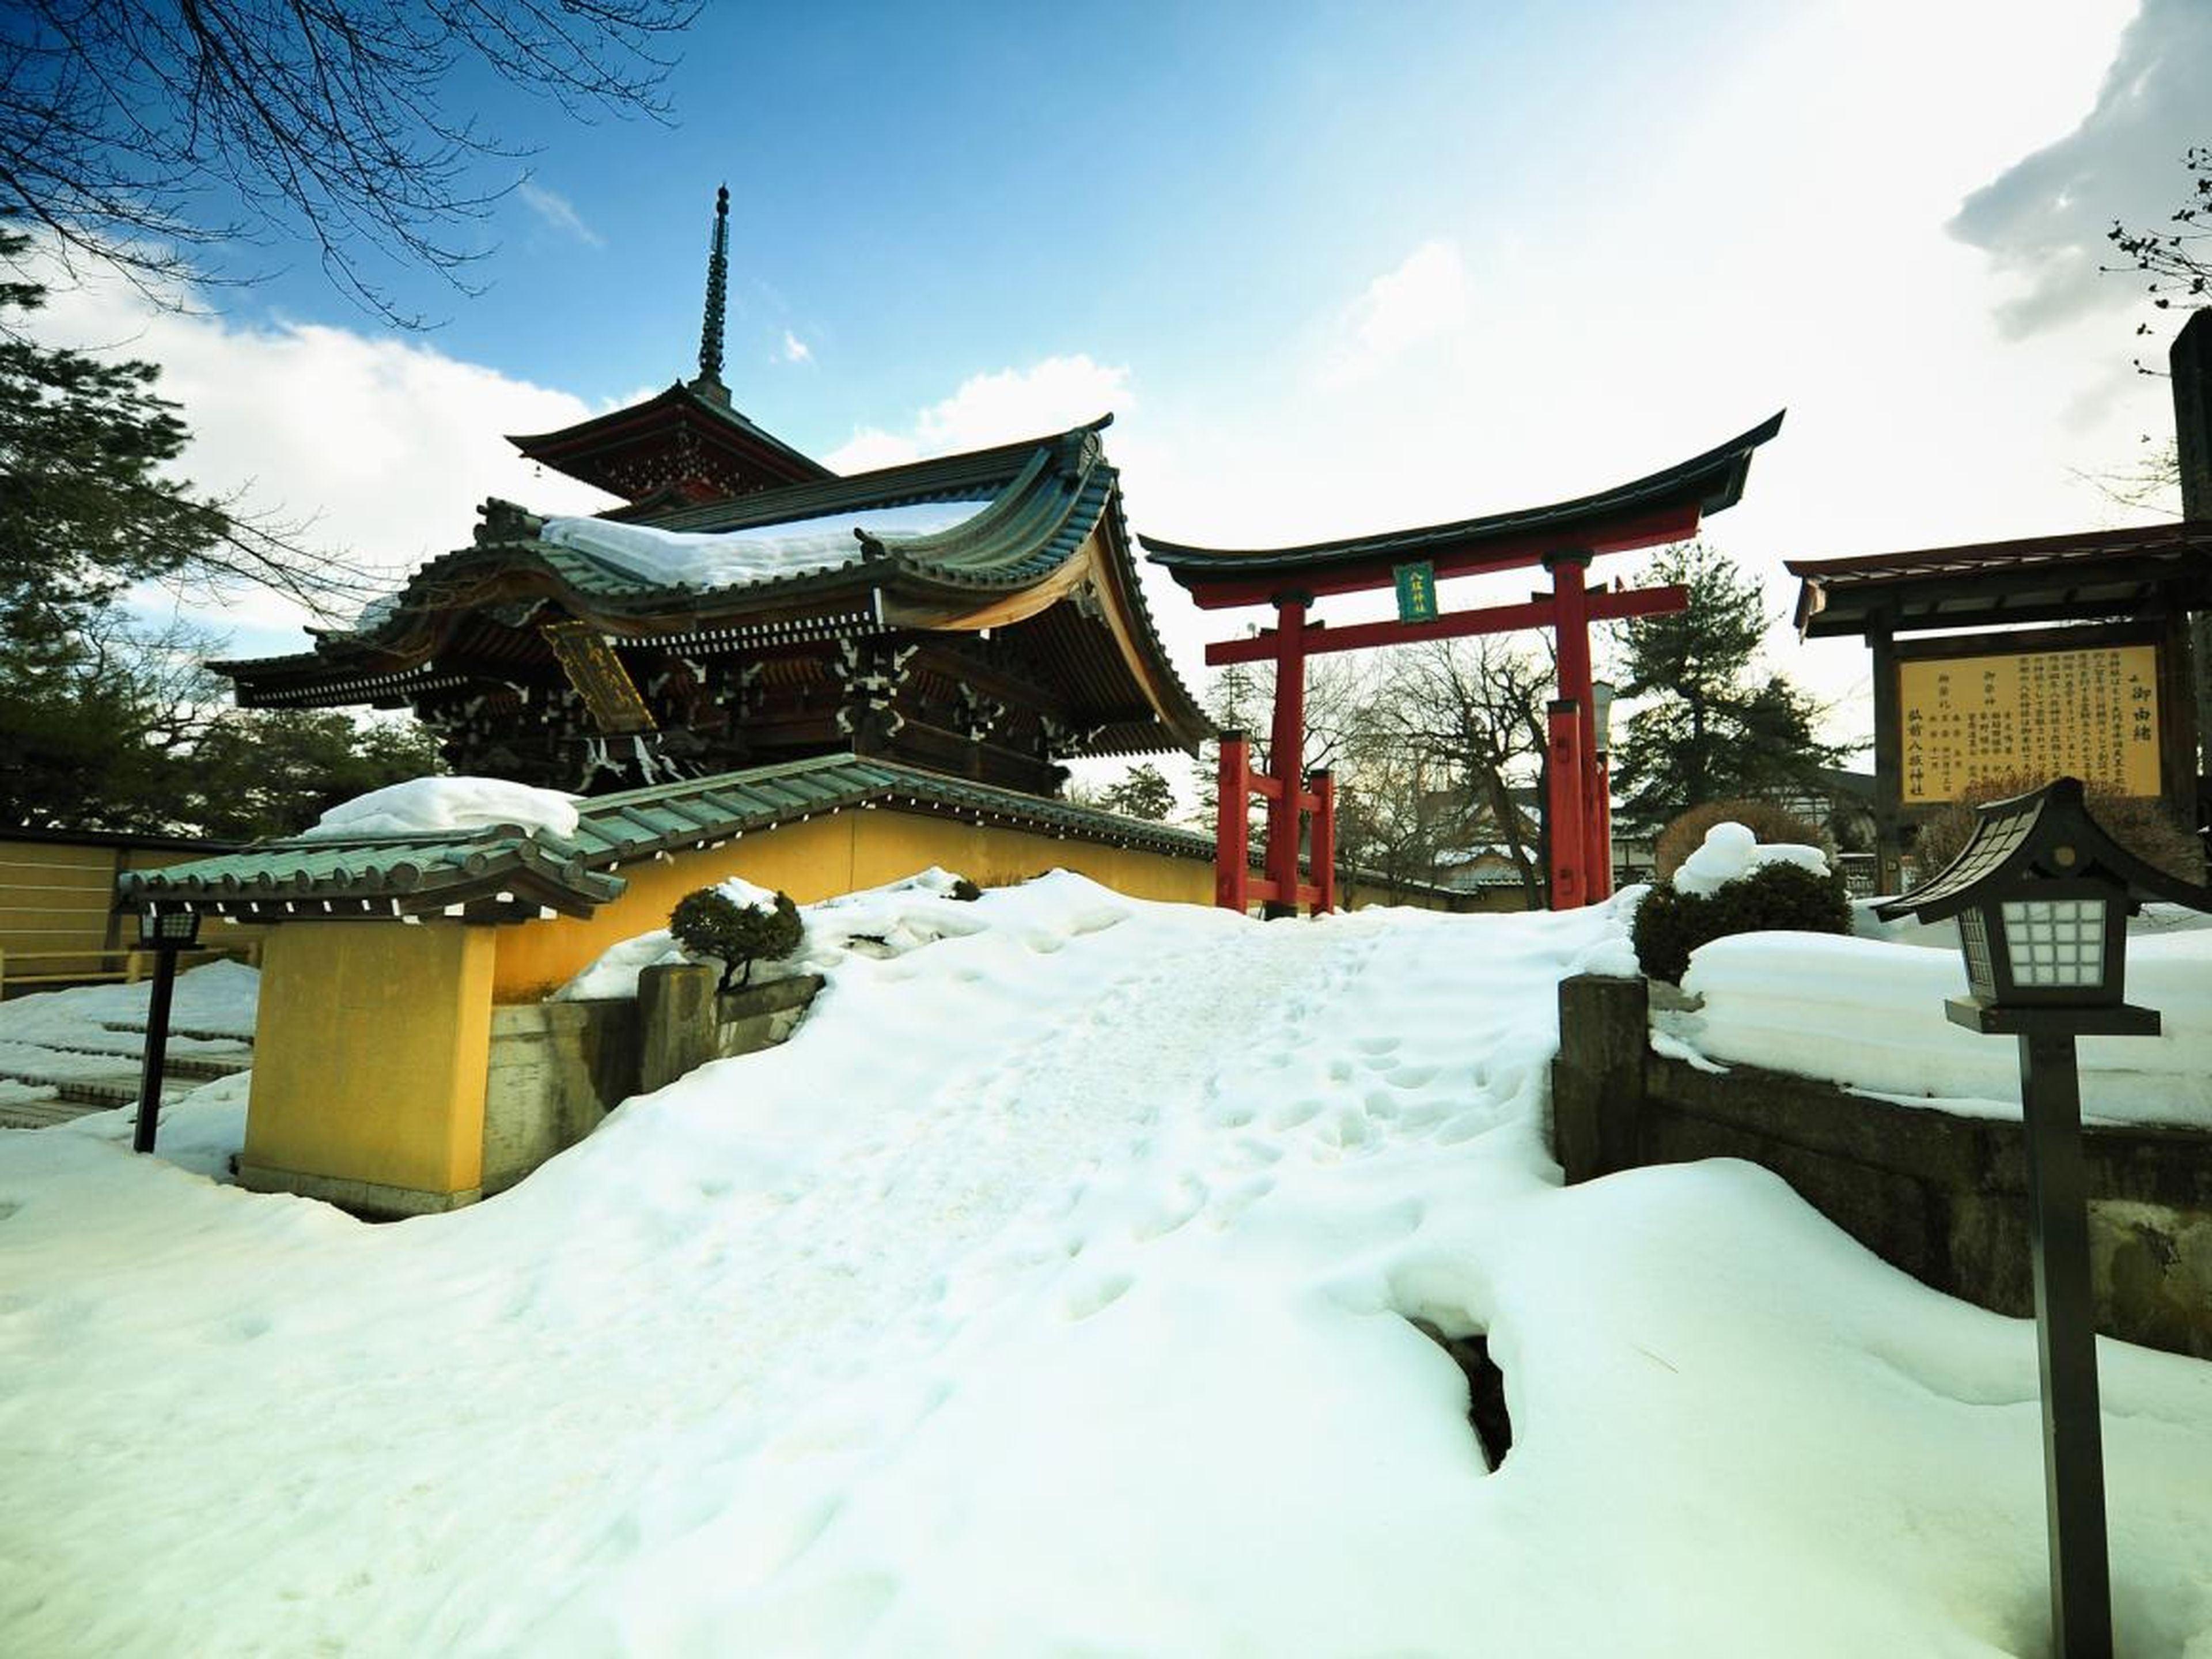 There are also plenty of temples and castles to visit throughout the entire Aomori Prefecture.